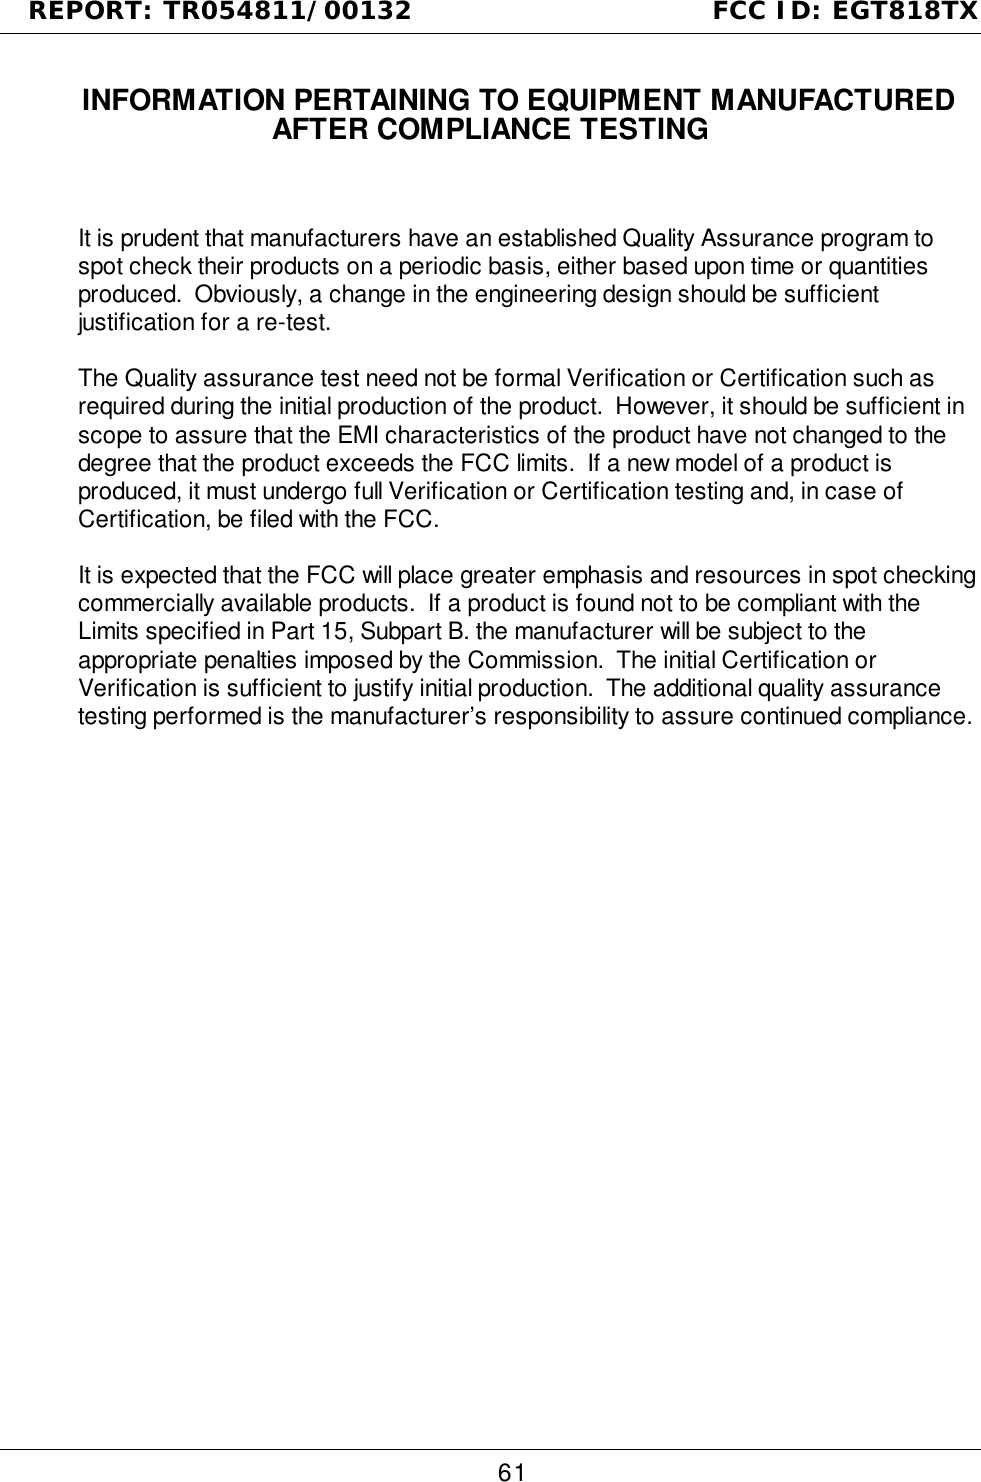 REPORT: TR054811/00132                                FCC ID: EGT818TX611.1  INFORMATION PERTAINING TO EQUIPMENT MANUFACTUREDAFTER COMPLIANCE TESTINGIt is prudent that manufacturers have an established Quality Assurance program tospot check their products on a periodic basis, either based upon time or quantitiesproduced.  Obviously, a change in the engineering design should be sufficientjustification for a re-test.The Quality assurance test need not be formal Verification or Certification such asrequired during the initial production of the product.  However, it should be sufficient inscope to assure that the EMI characteristics of the product have not changed to thedegree that the product exceeds the FCC limits.  If a new model of a product isproduced, it must undergo full Verification or Certification testing and, in case ofCertification, be filed with the FCC.It is expected that the FCC will place greater emphasis and resources in spot checkingcommercially available products.  If a product is found not to be compliant with theLimits specified in Part 15, Subpart B. the manufacturer will be subject to theappropriate penalties imposed by the Commission.  The initial Certification orVerification is sufficient to justify initial production.  The additional quality assurancetesting performed is the manufacturer’s responsibility to assure continued compliance.